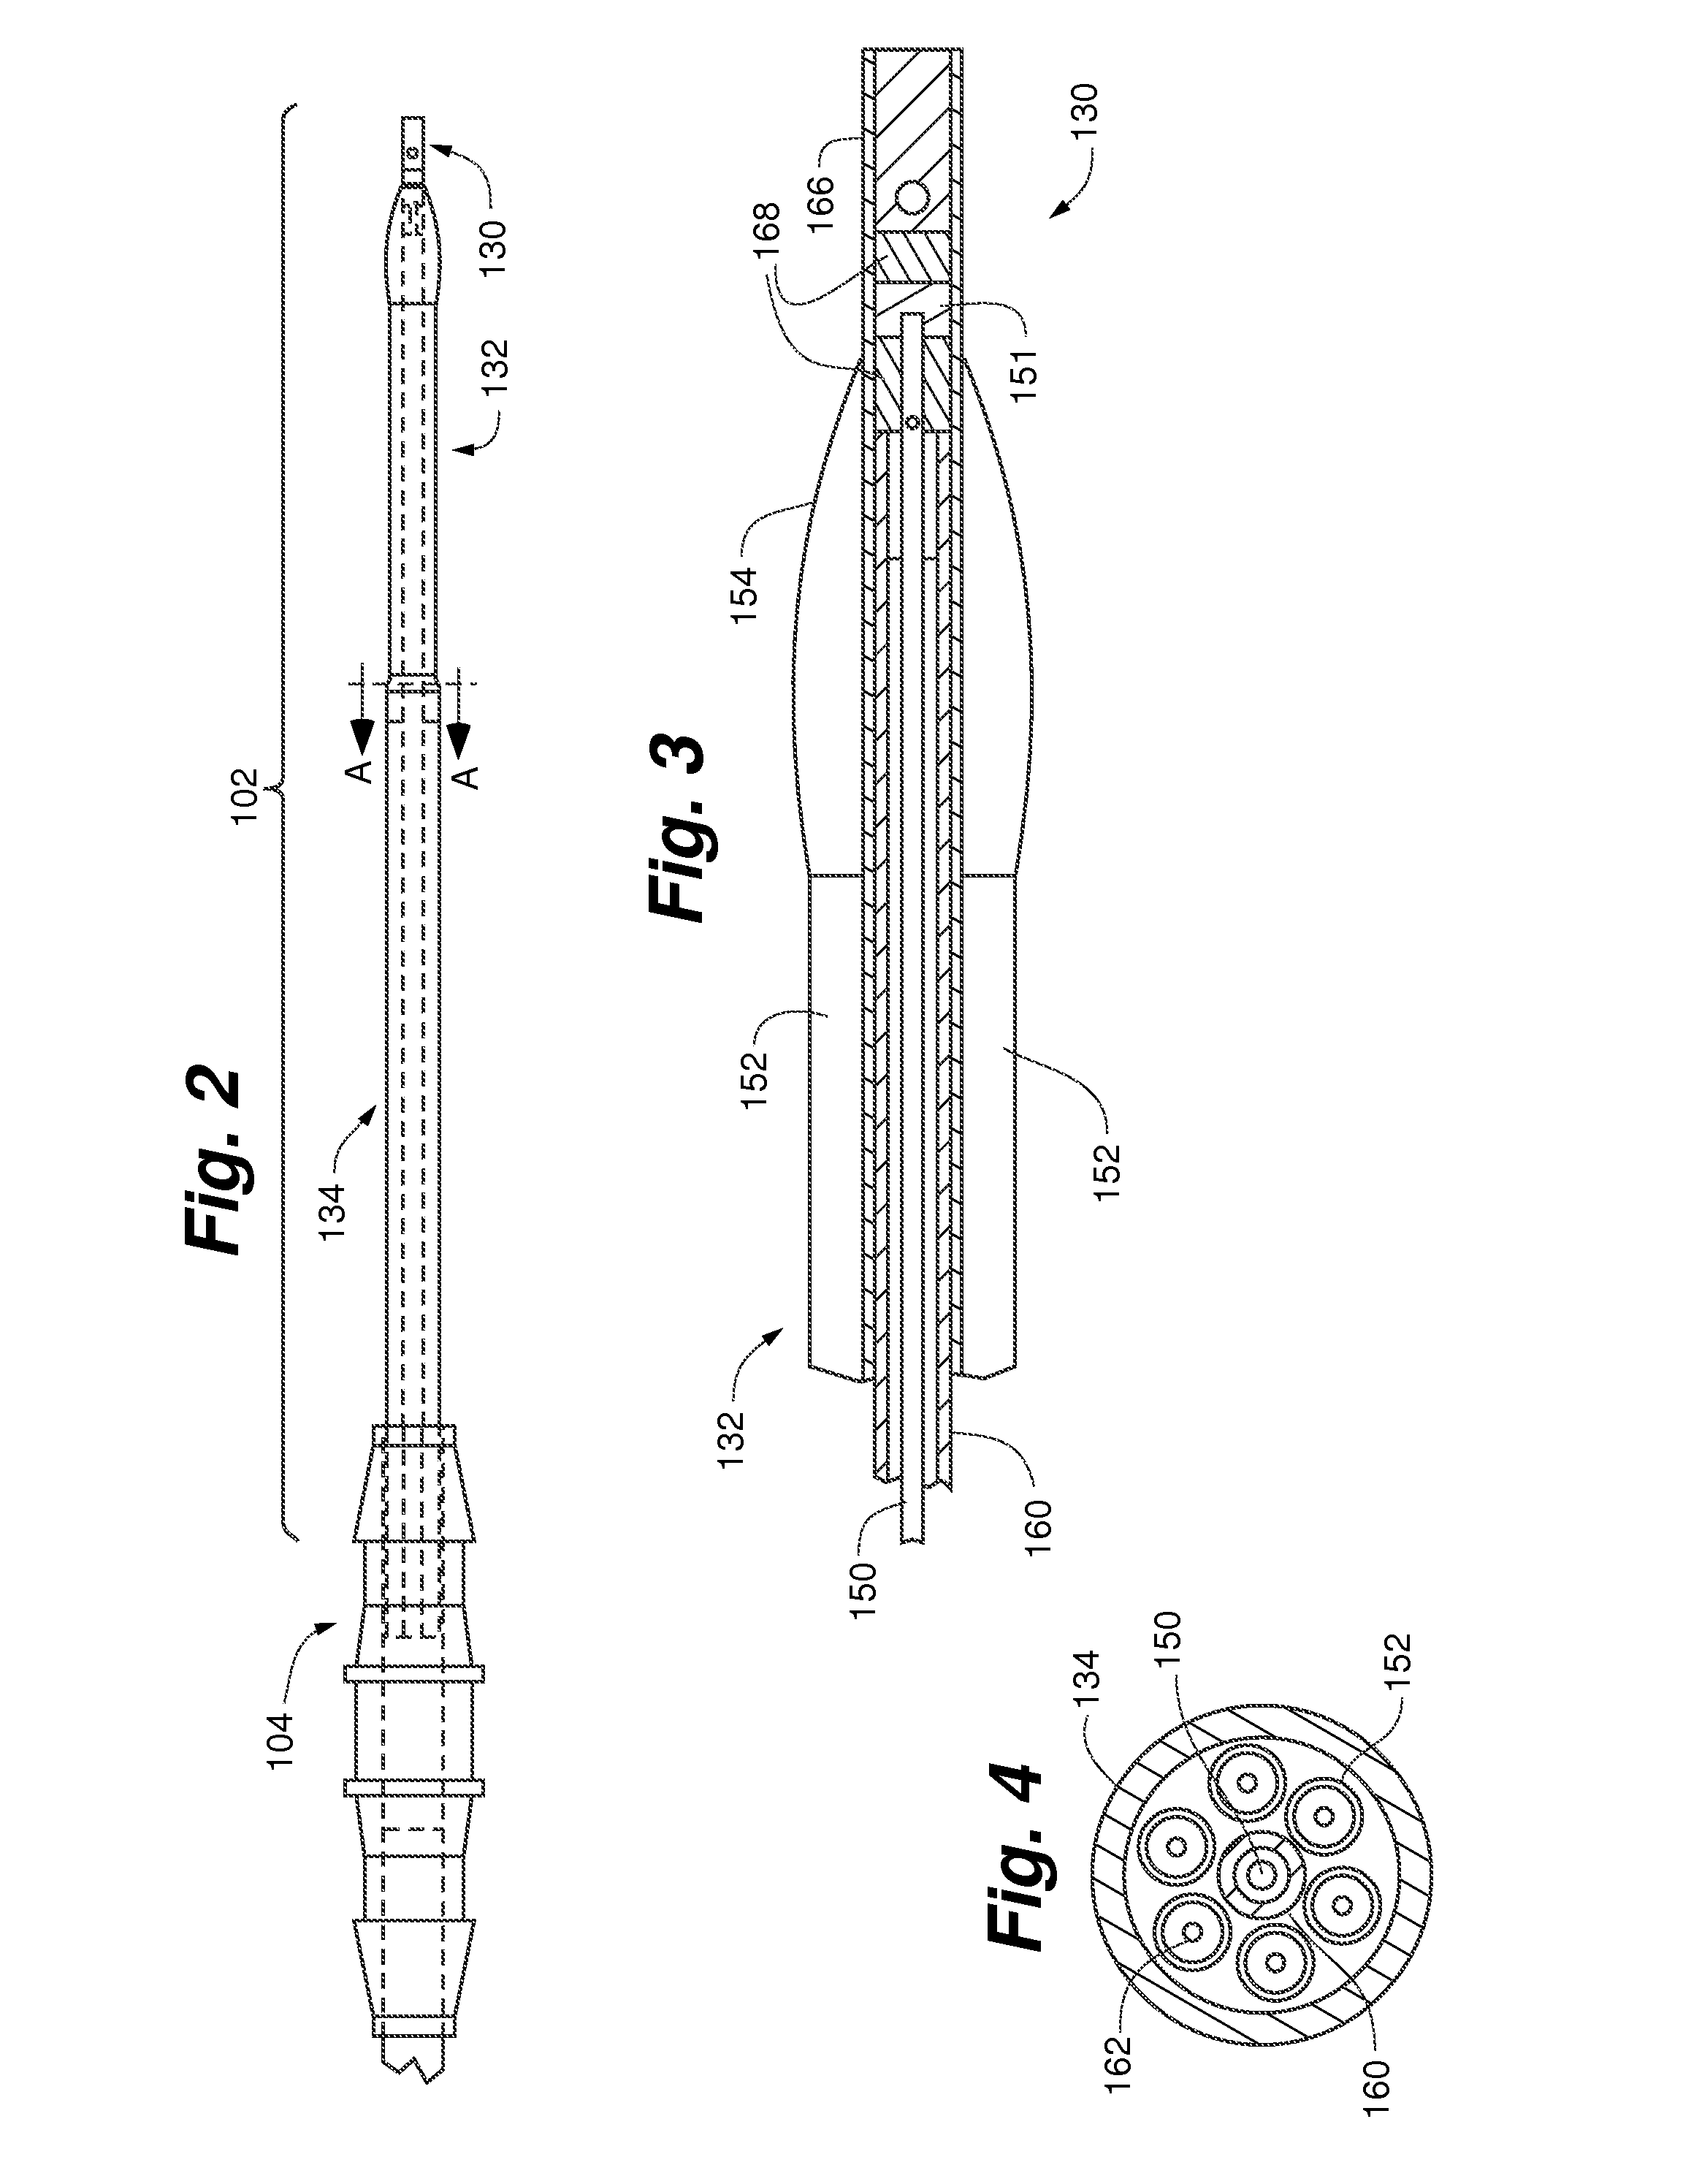 System and method for treating compartment syndrome